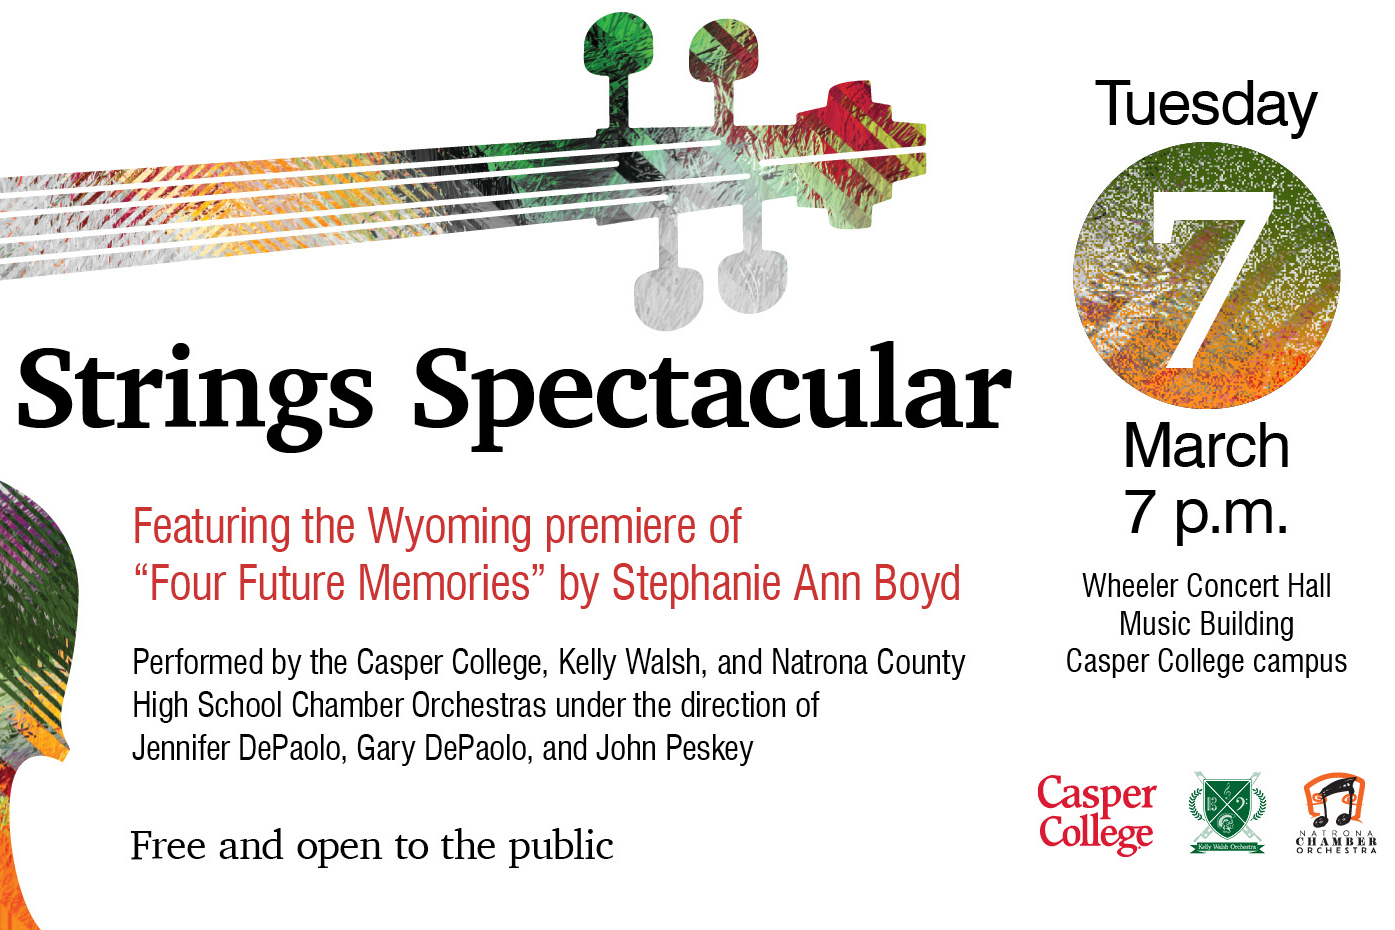 Image for Strings Spectacular Concert.